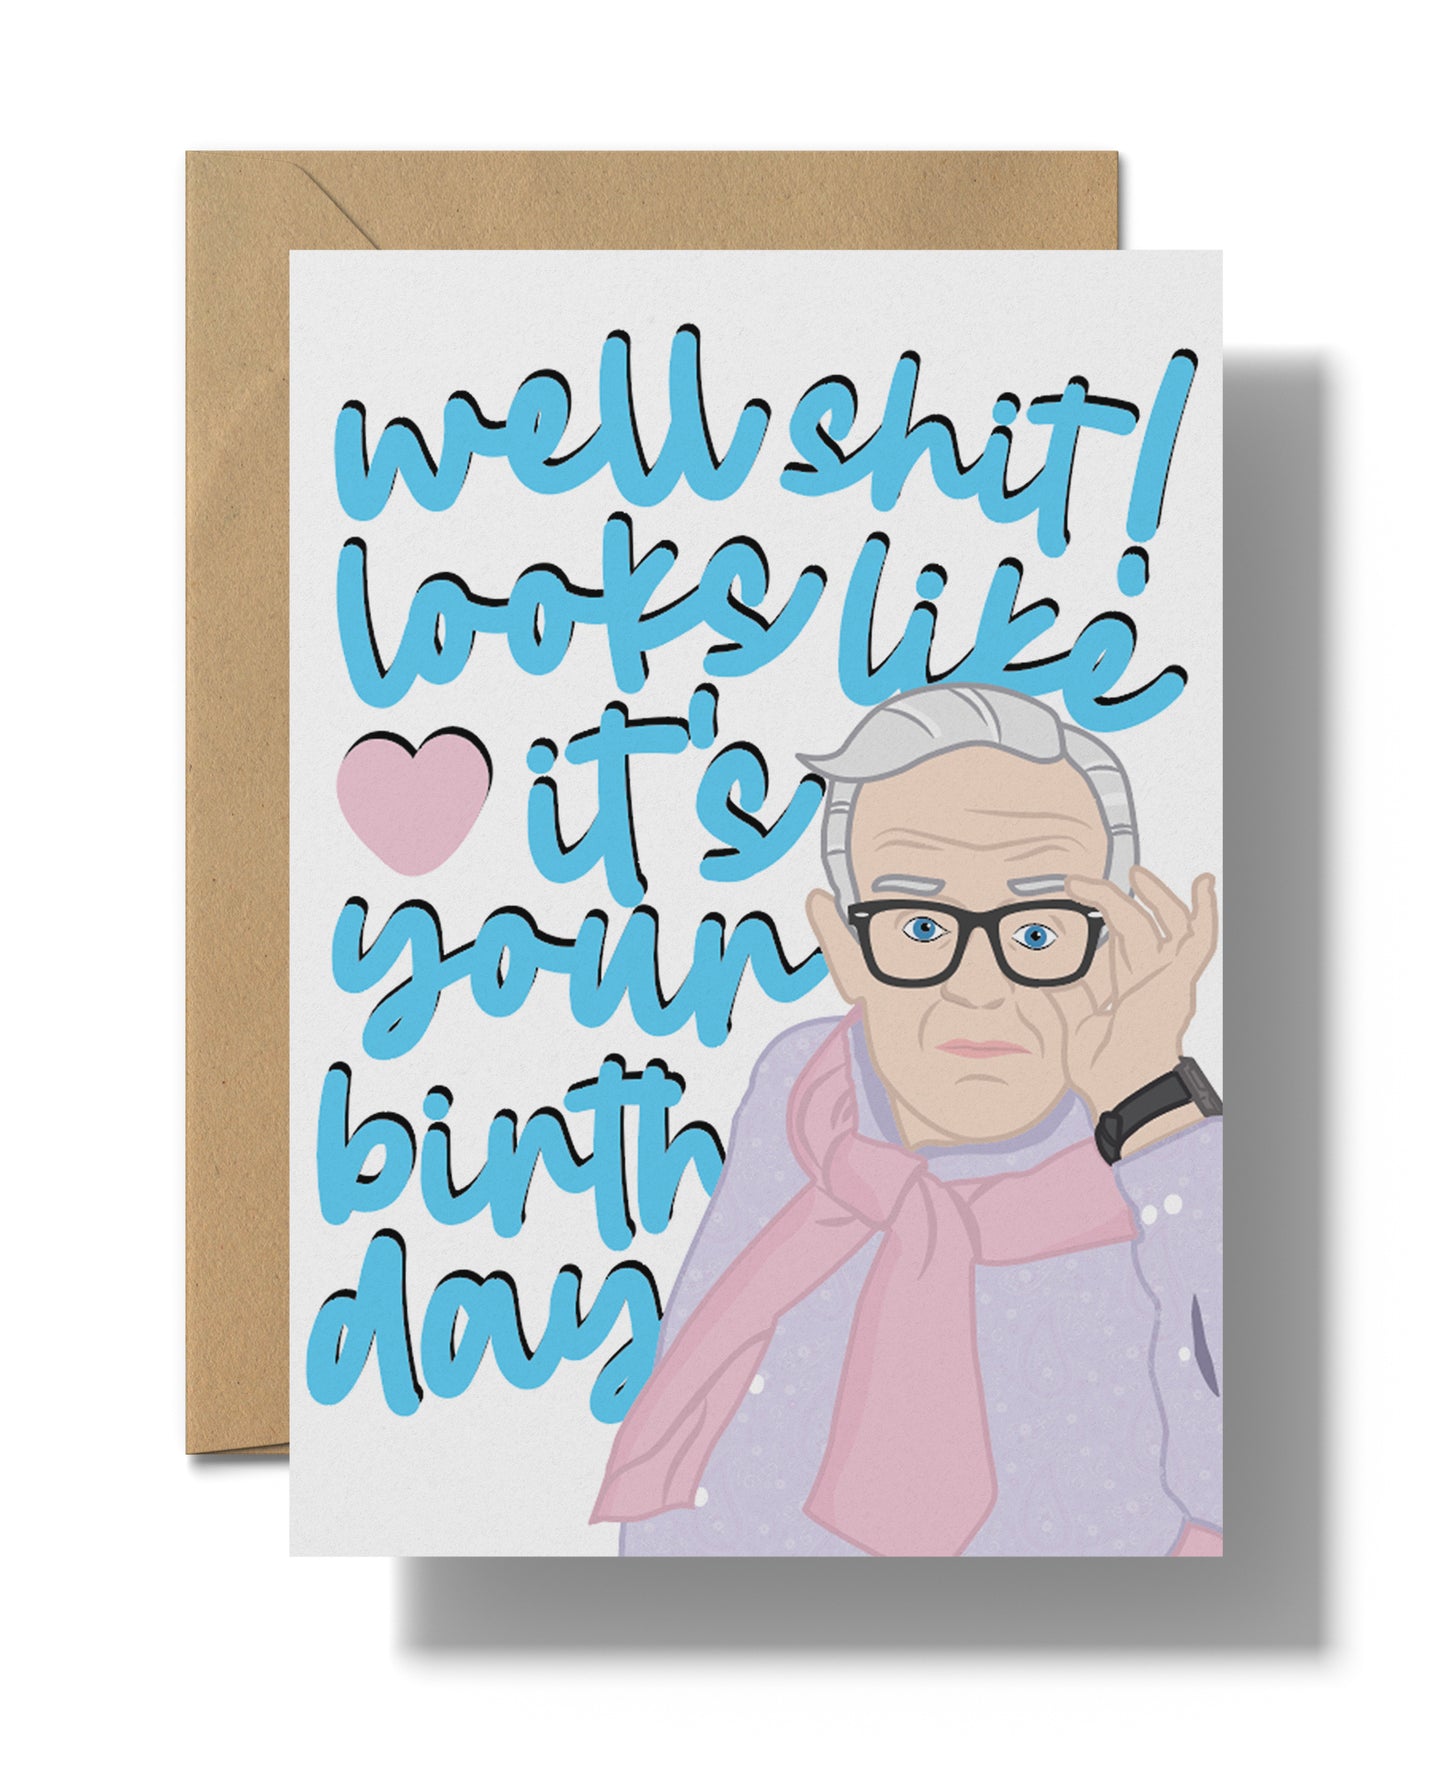 Well Shit! Looks like it's your birthday | Printable card